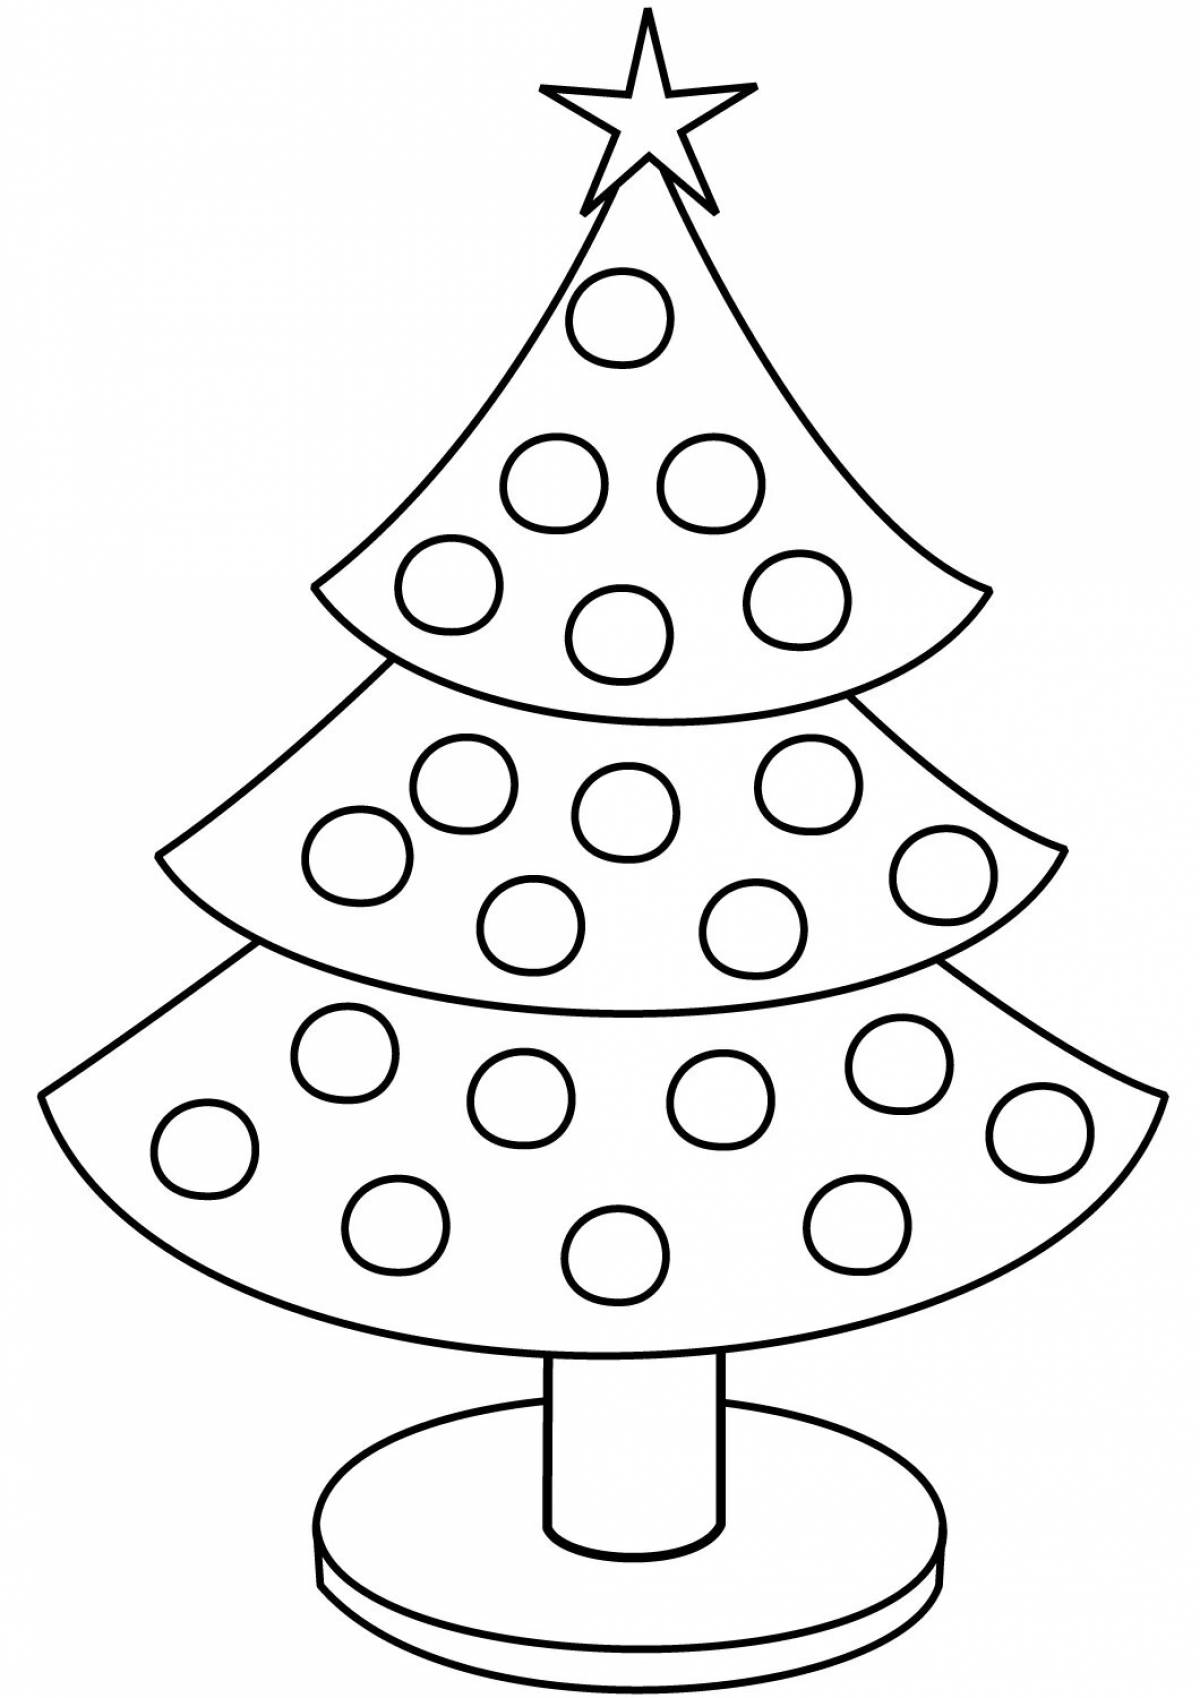 Exquisite Christmas tree with balls for kids